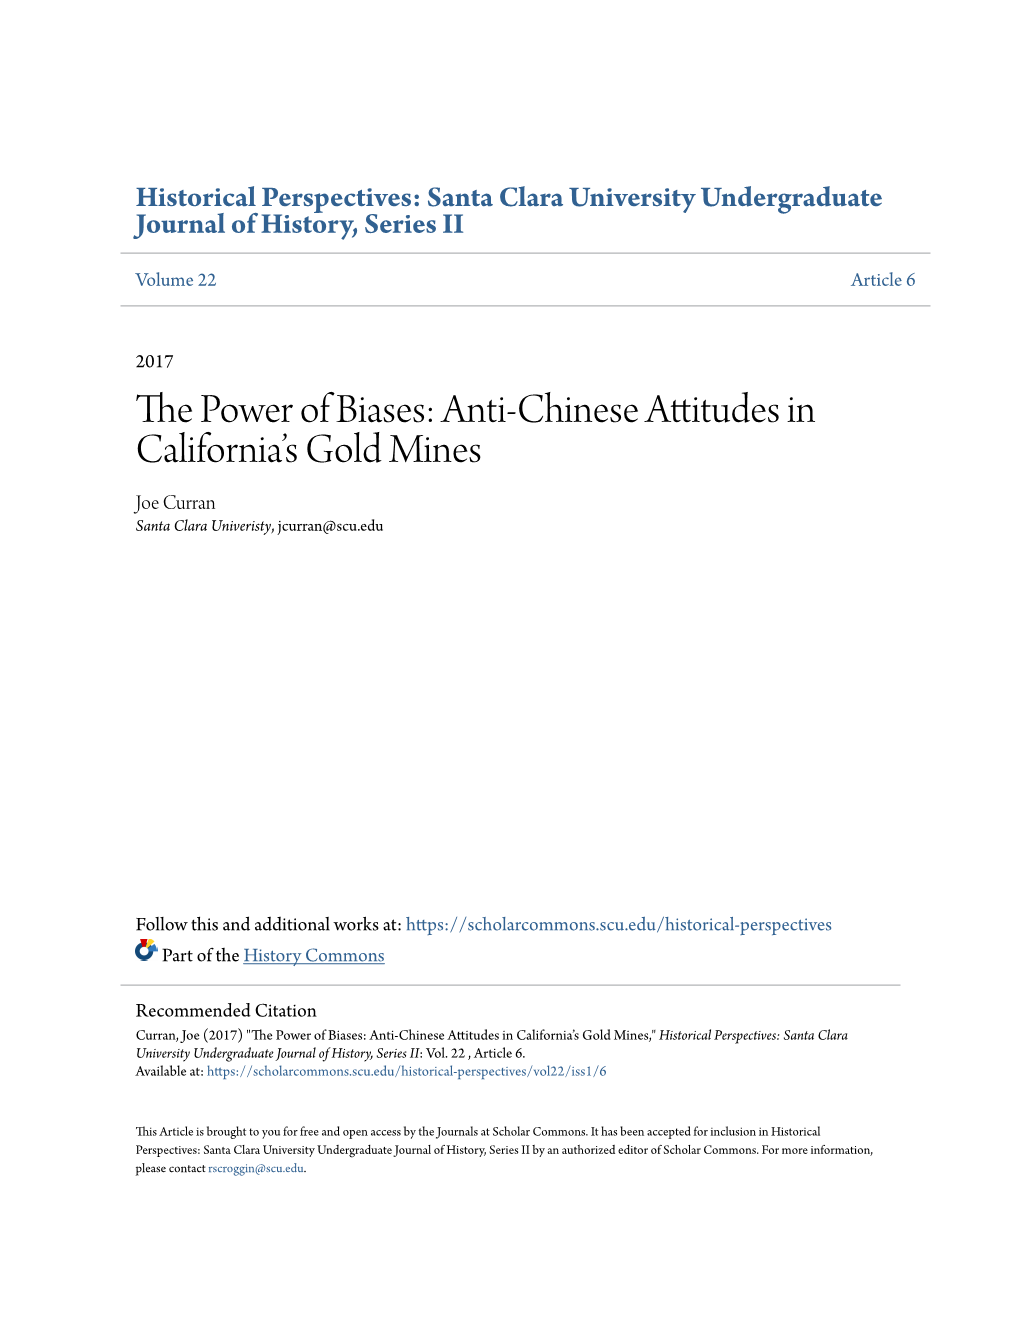 The Power of Biases: Anti-Chinese Attitudes in Californiaâ•Žs Gold Mines